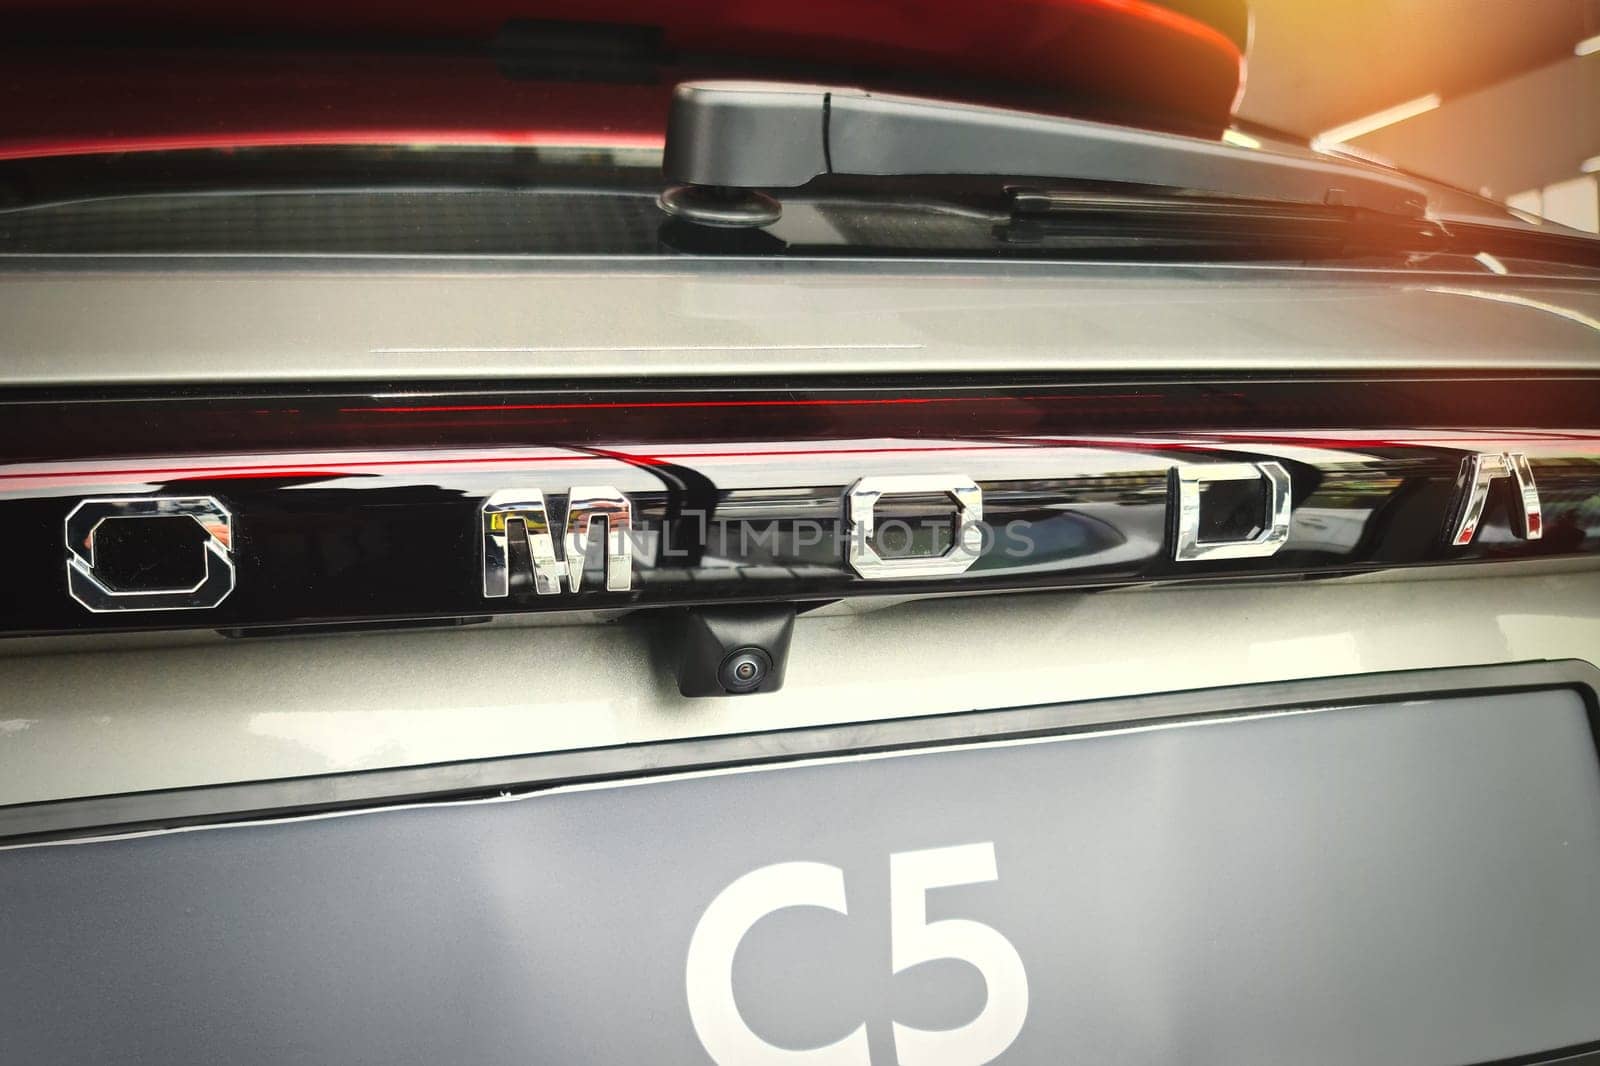 Close-up of the rear trunk door of a new Chinese OMODA C5 car by Rom4ek